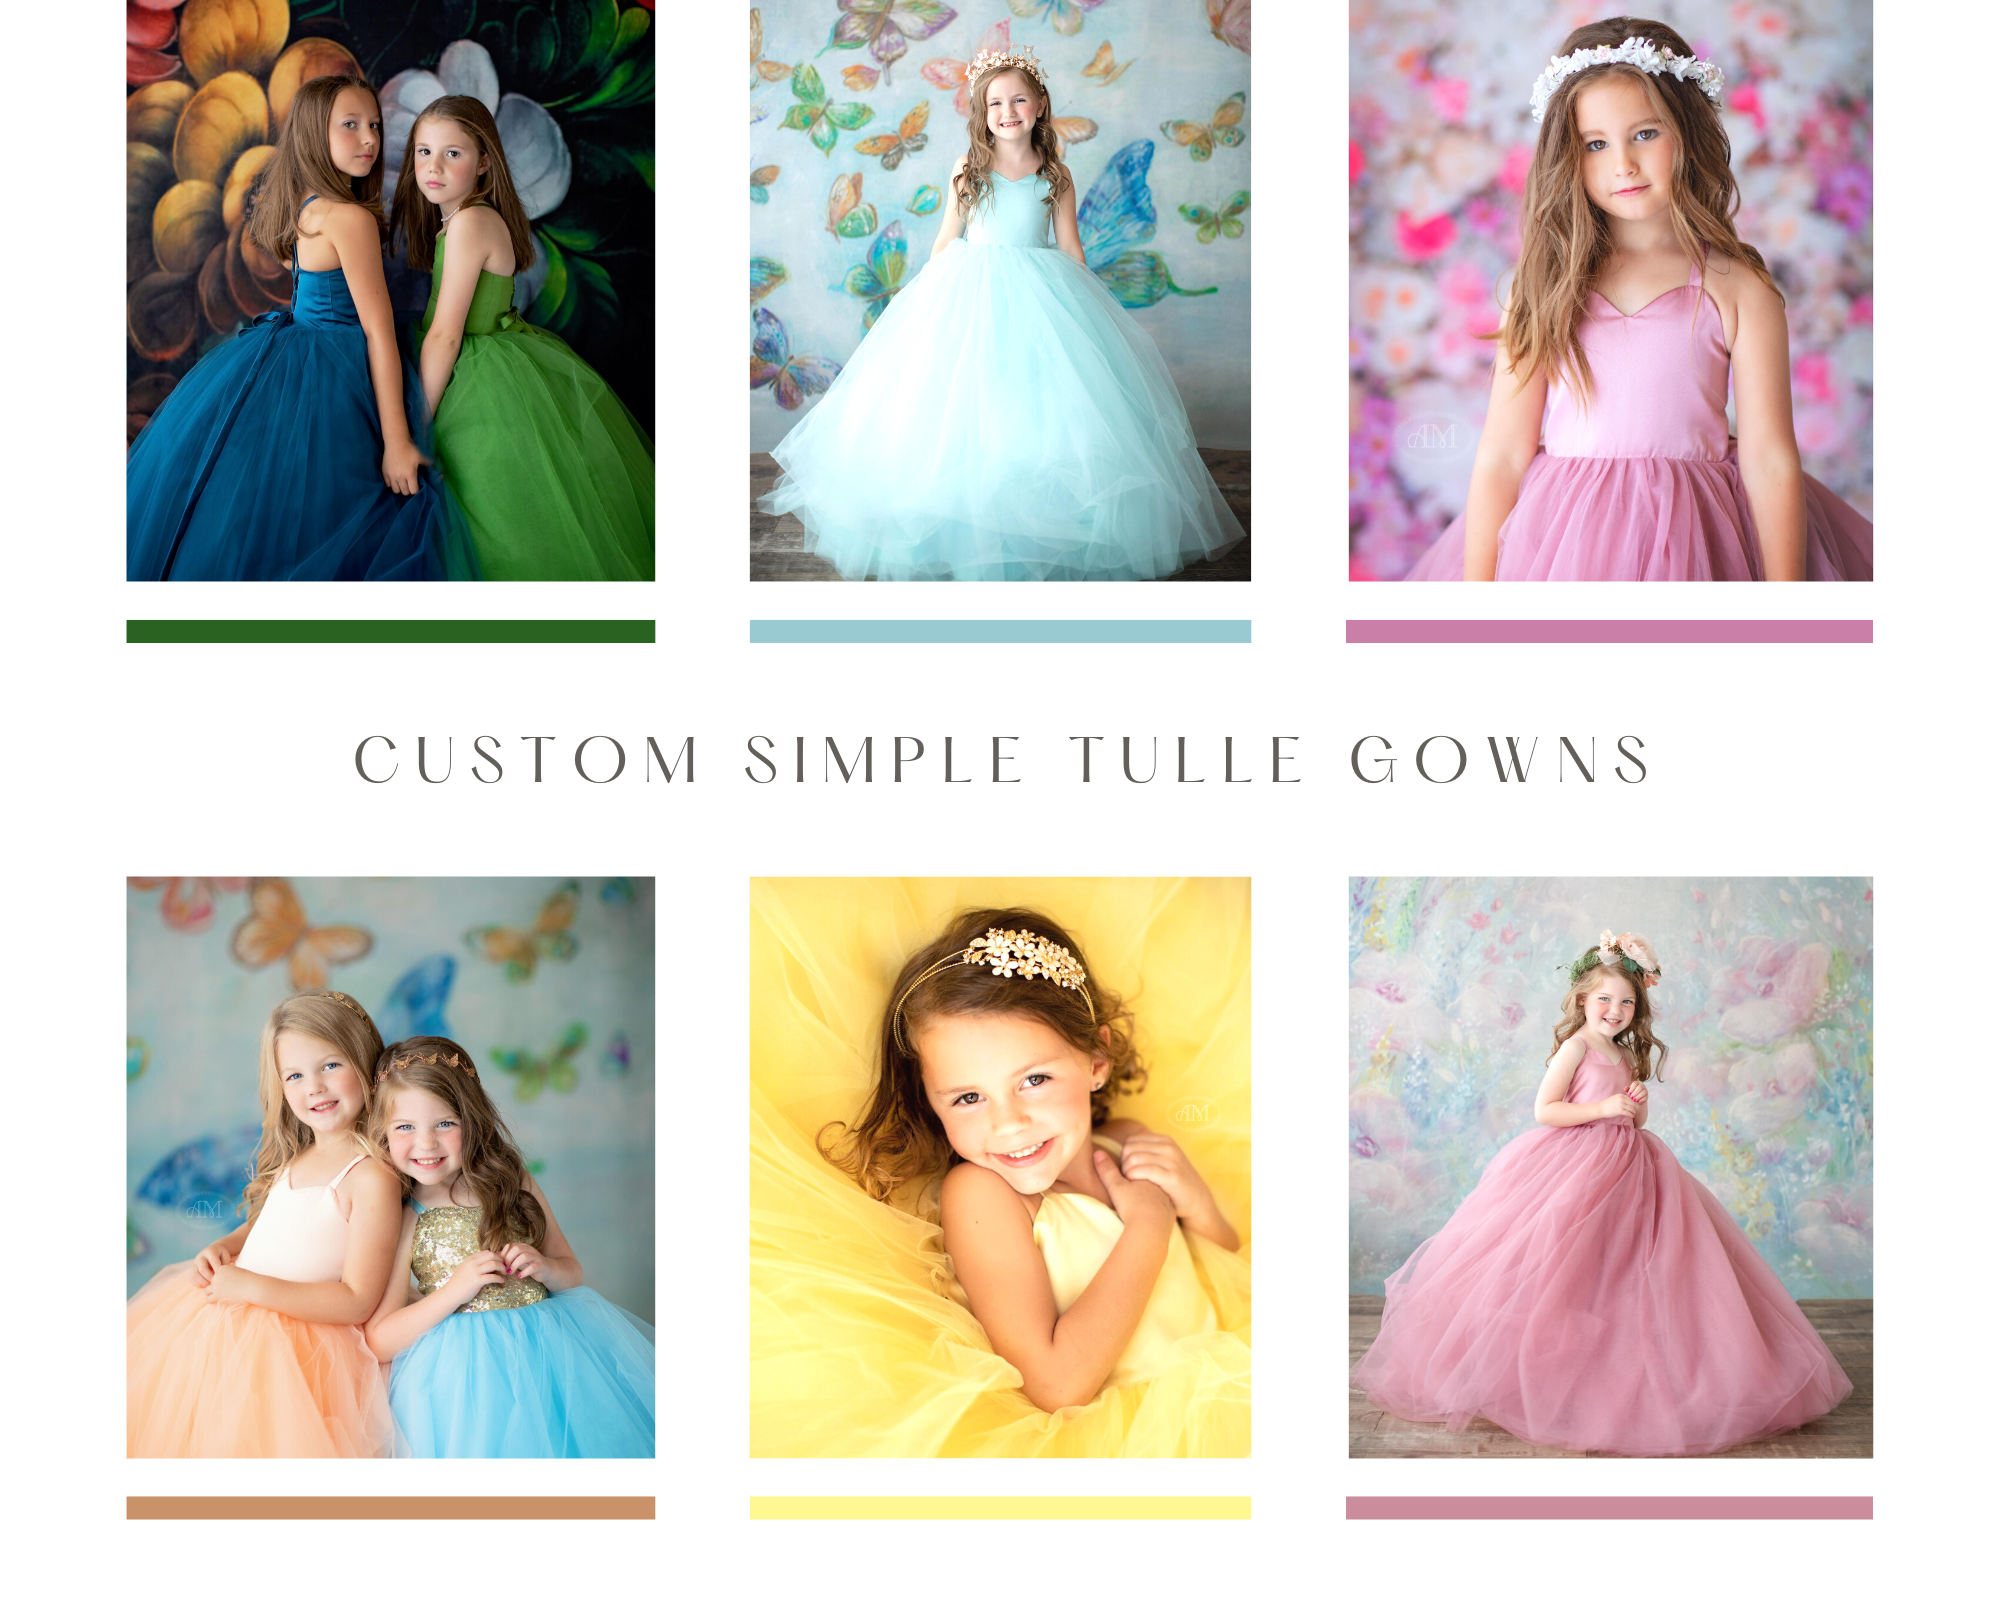 "Adorable flower girl dress with delicate lace detailing, a perfect fit for your little princess."